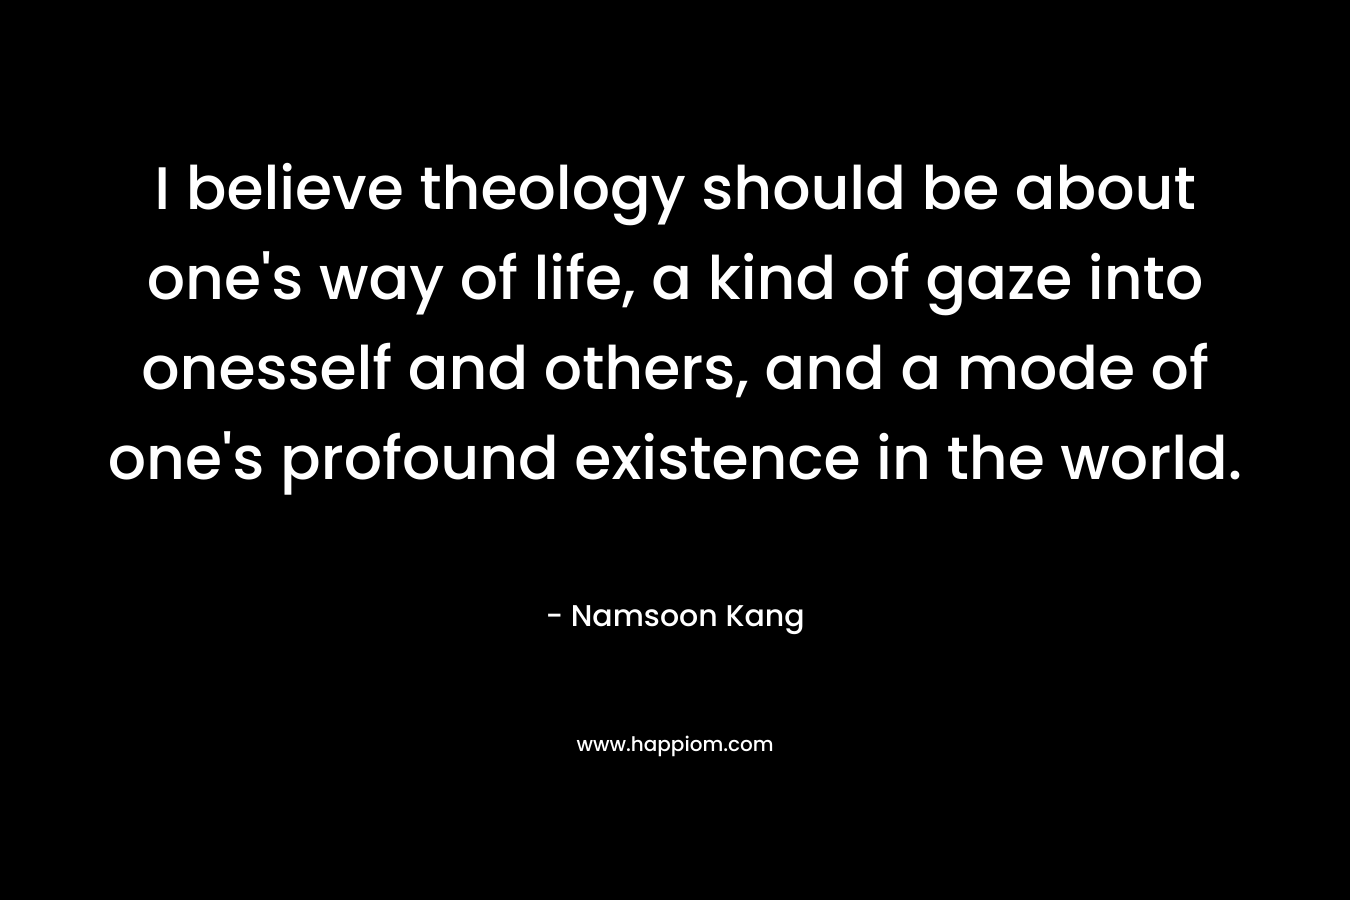 I believe theology should be about one’s way of life, a kind of gaze into onesself and others, and a mode of one’s profound existence in the world. – Namsoon Kang